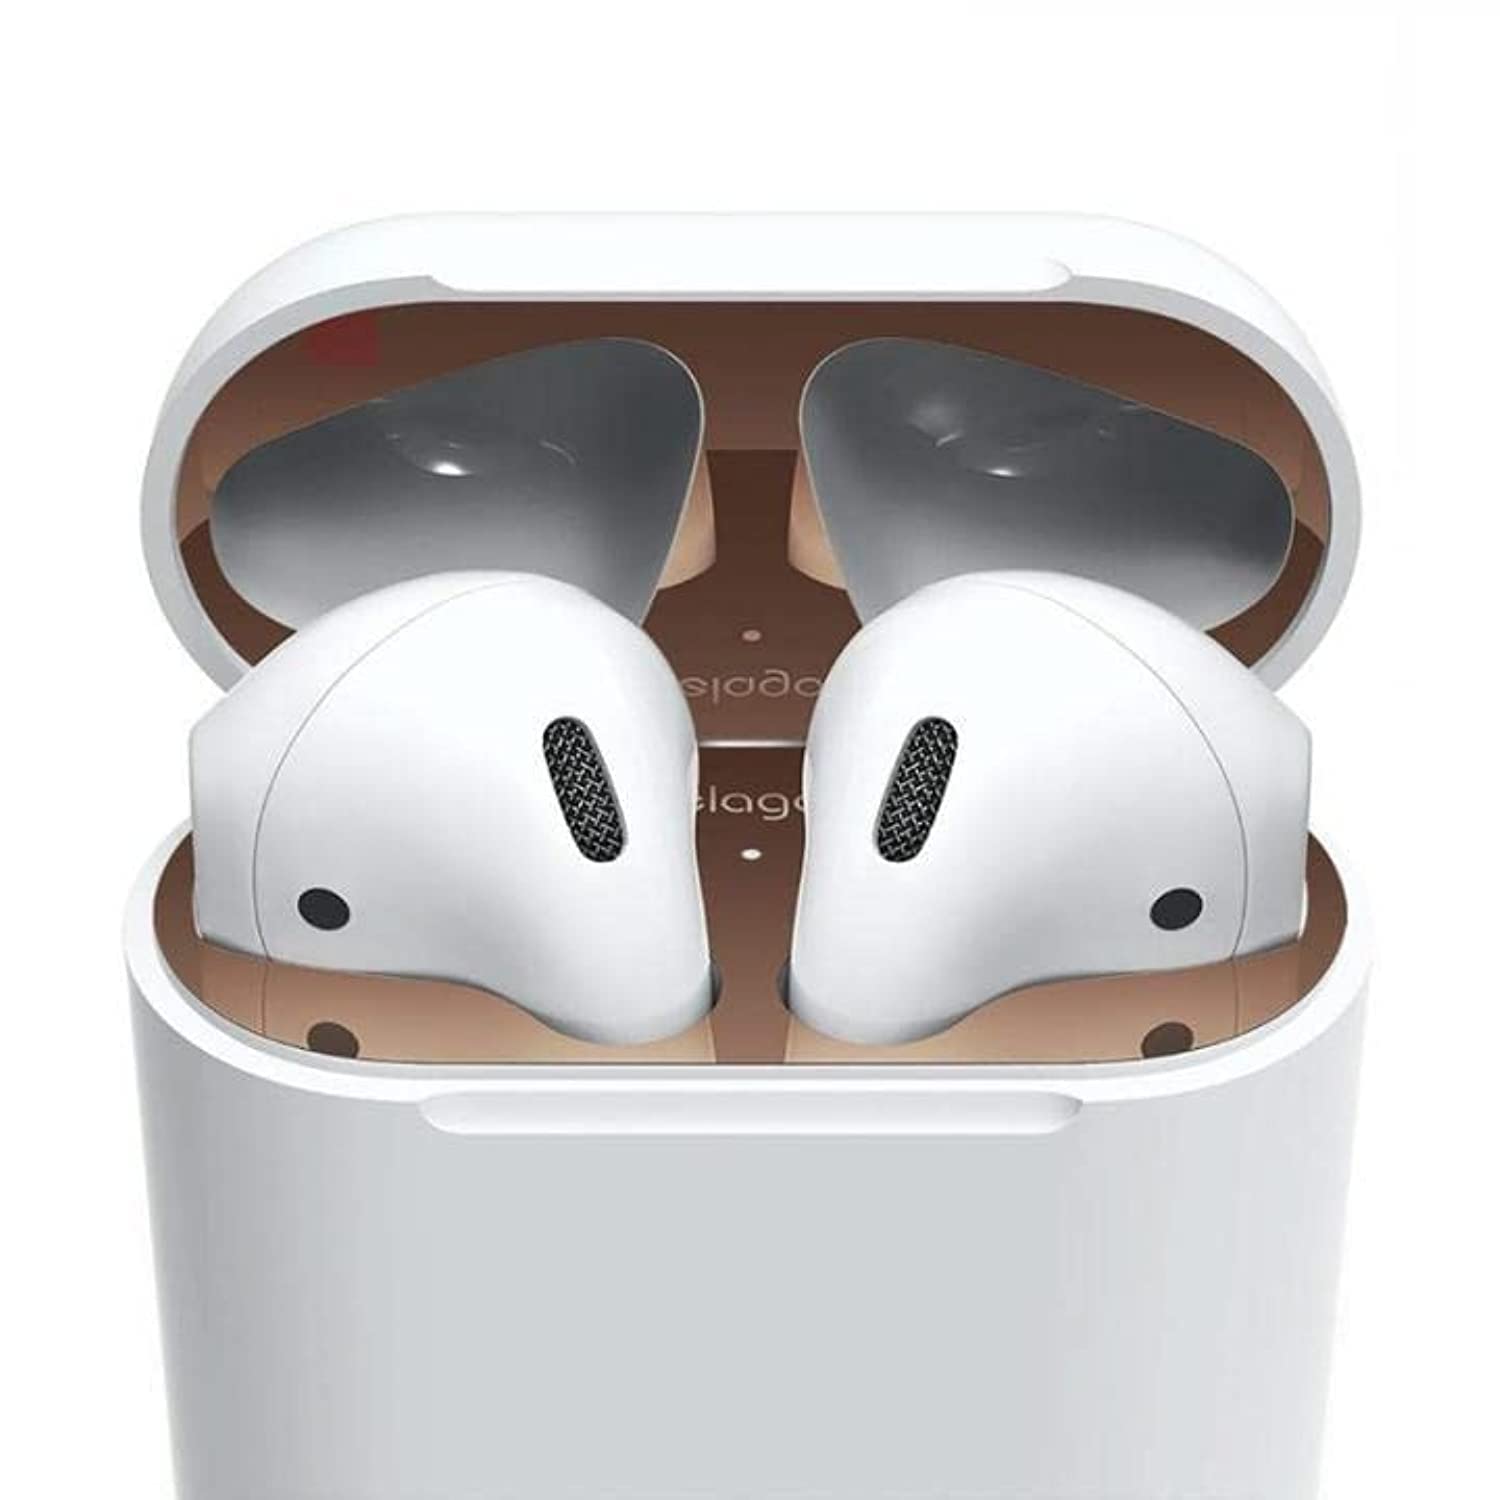 elago AirPods 対応 ダストガード 金属粉 侵入防止 防塵 アクセサリー メタリックプレート 2セット [ Apple AirPods1/AirPods2 with Charging Case エアーポッズ 対応 ] DUST GUARD ローズゴールド